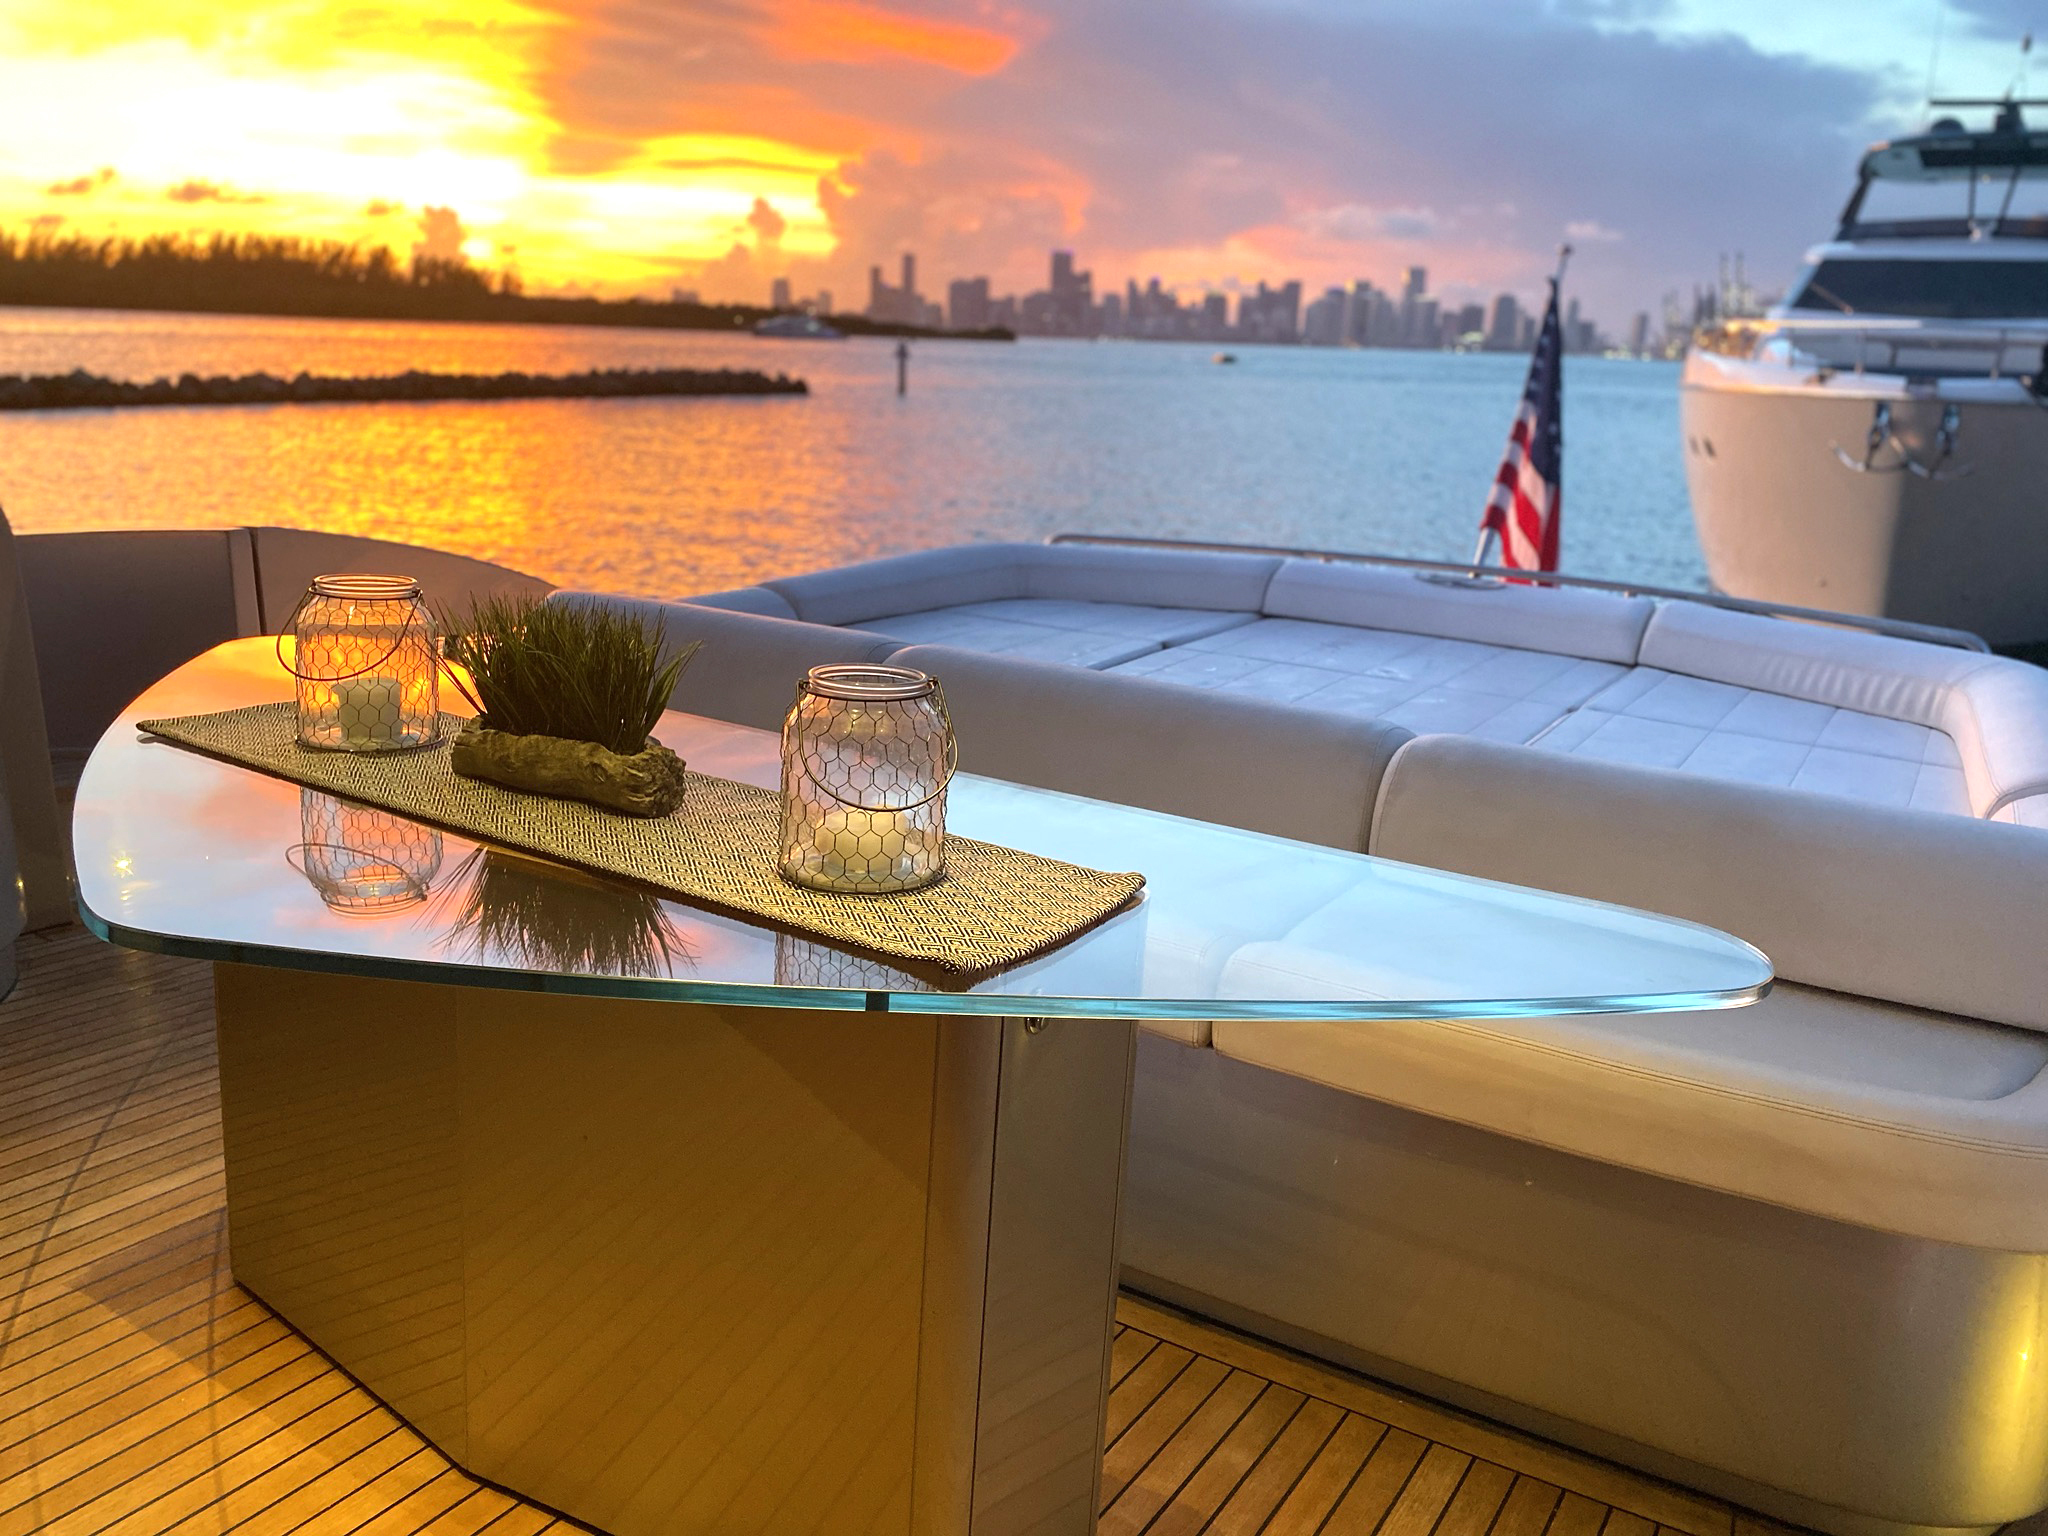 90-Pershing-YCM-90-Yacht-For-Charter-Miami-Sun-Deck